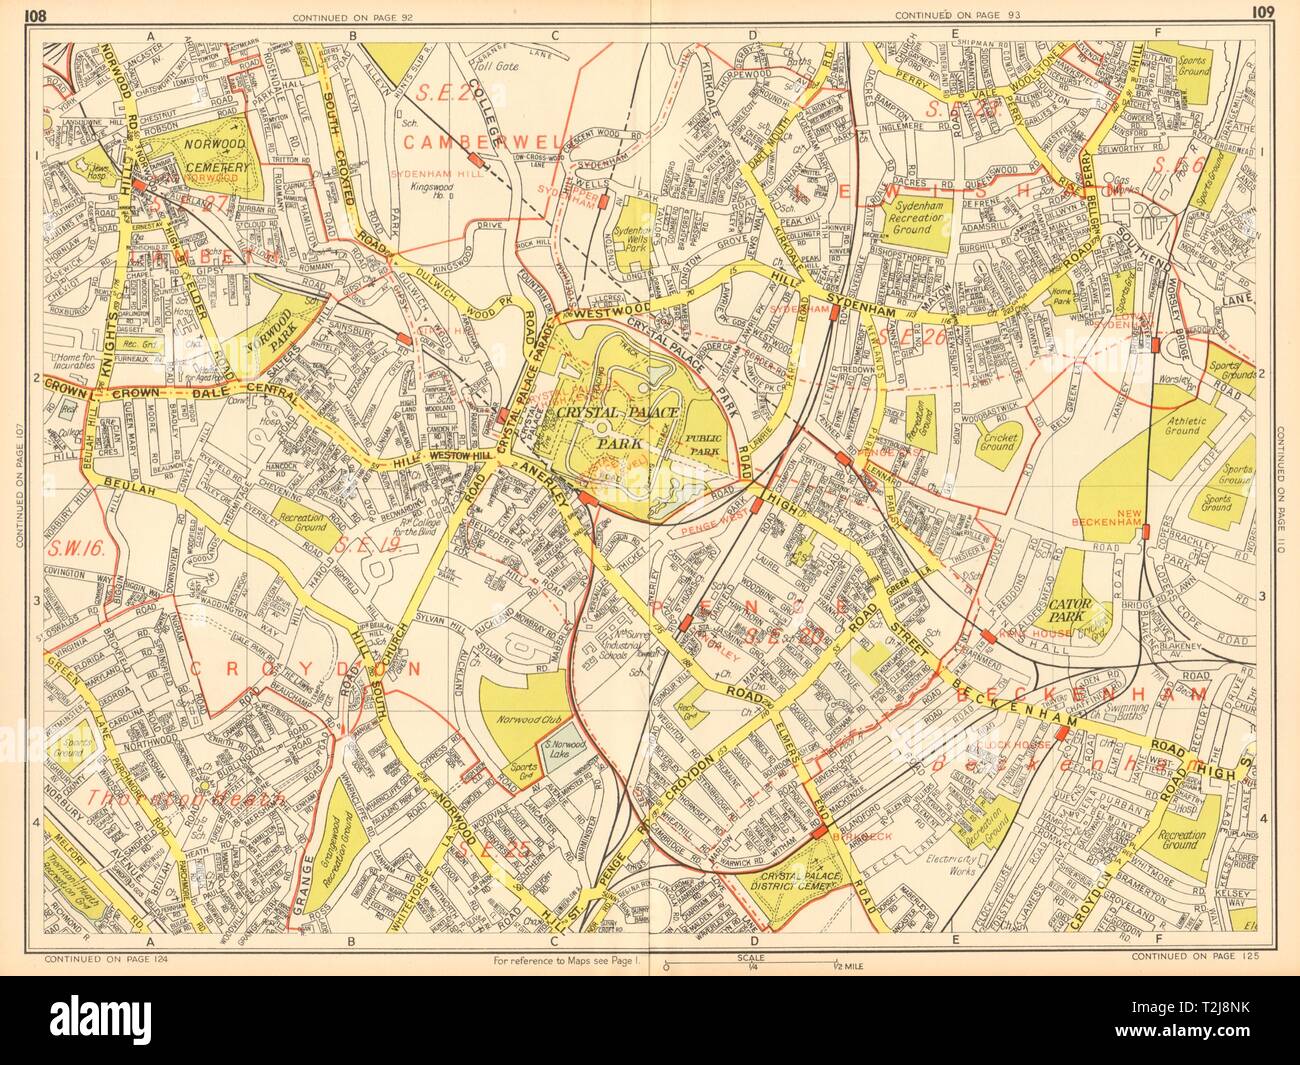 GEOGRAPHERS A-Z 1964 map LONDON NW Acton Willesden Queens Park North Kensington 